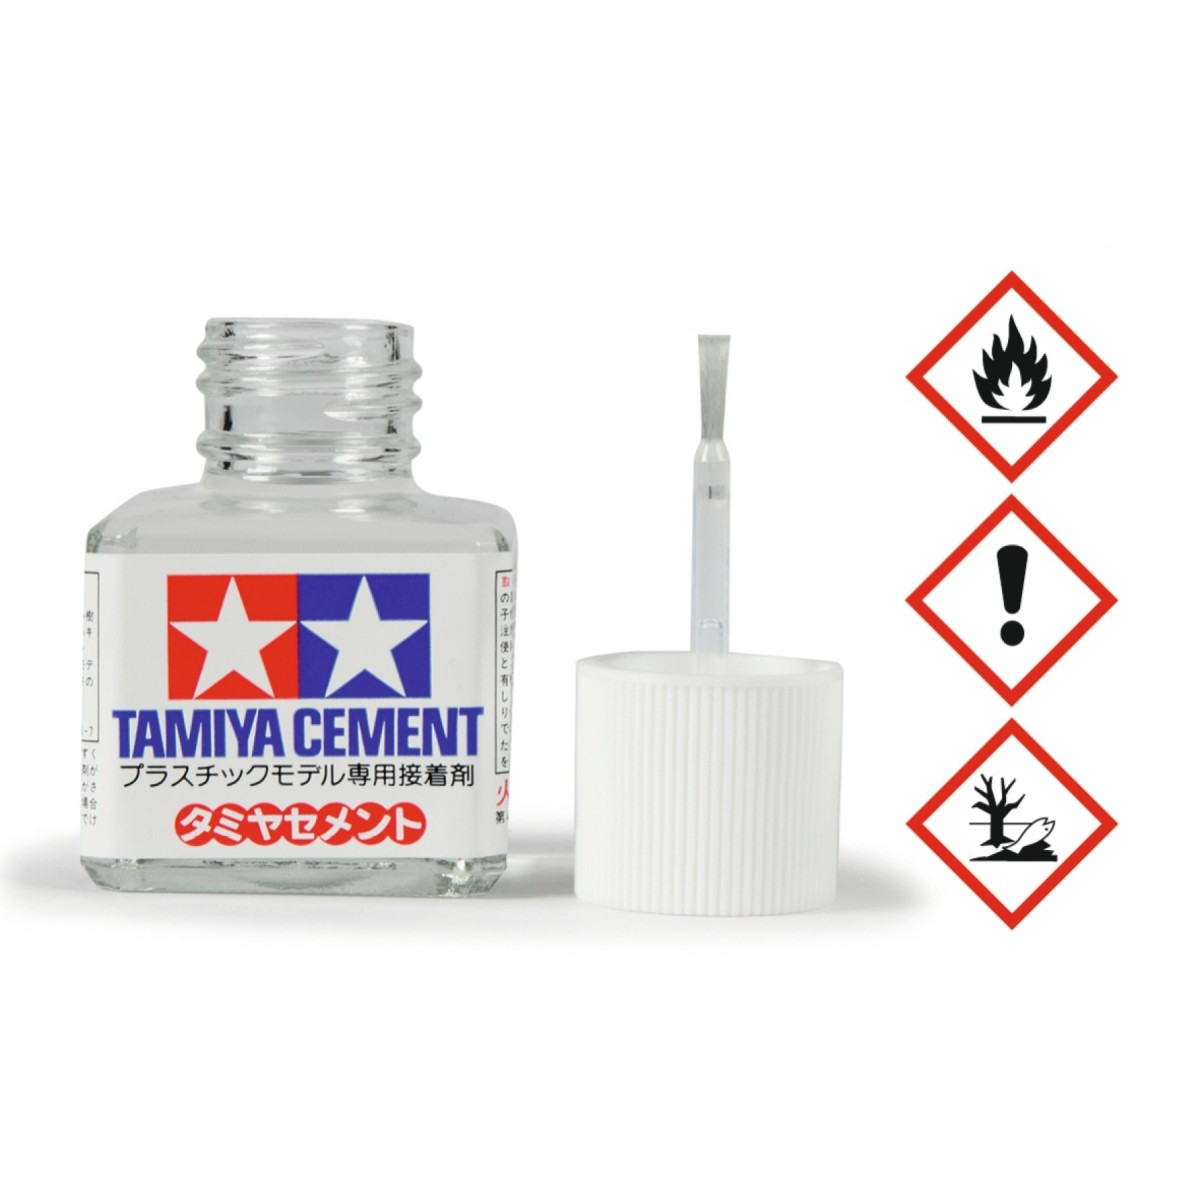 3 PACK special Tamiya 87038 Extra Thin Cement 40 ml Plastic Model